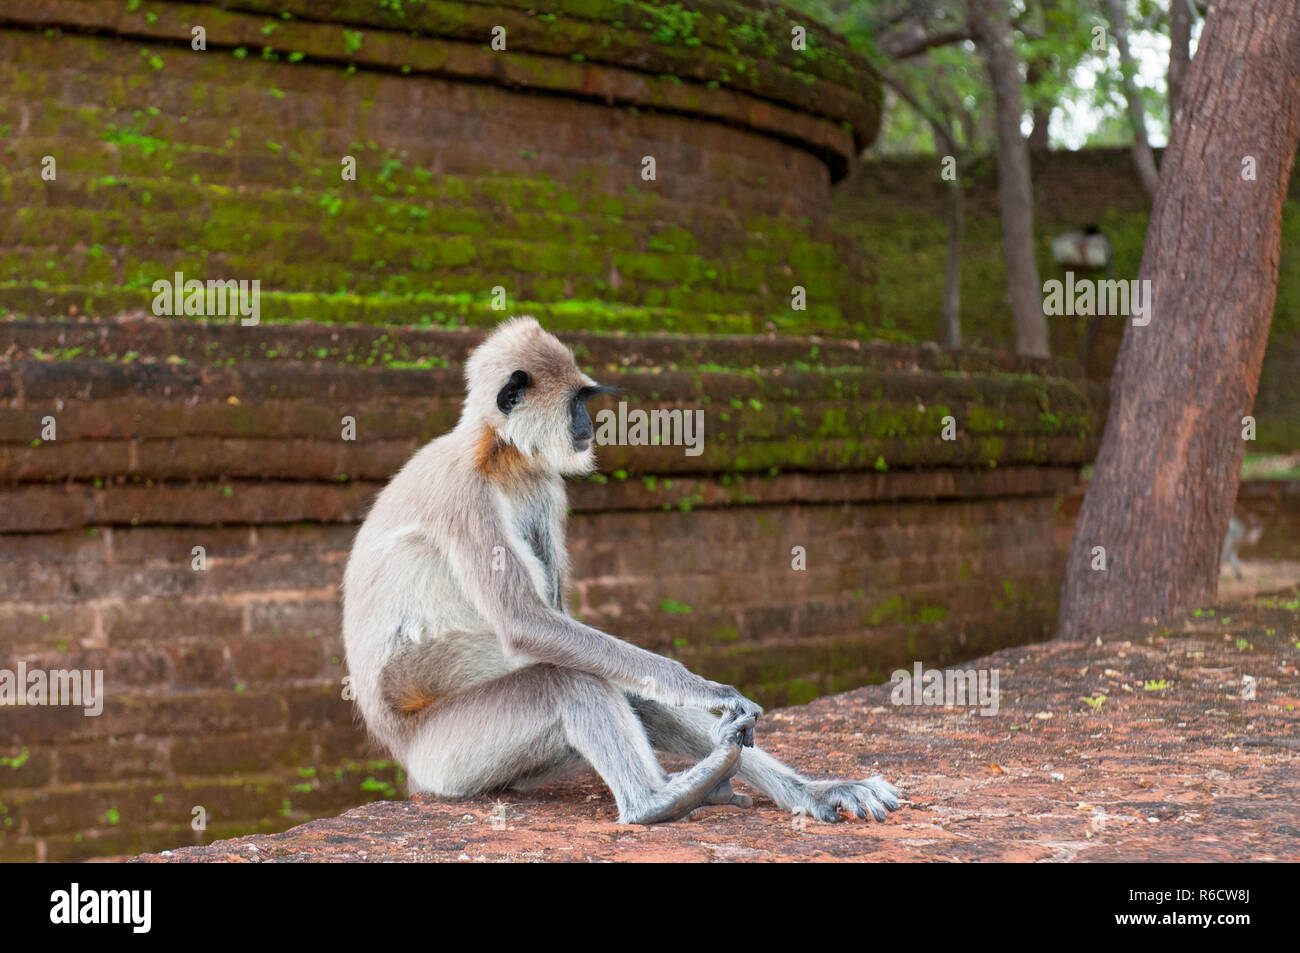 Gray Langurs Or Hanuman Langurs, The Most Widespread Langurs Of The Indian Subcontinent, Are A Group Of Old World Monkeys, Polonnaruwa, Sri Lanka Stock Photo